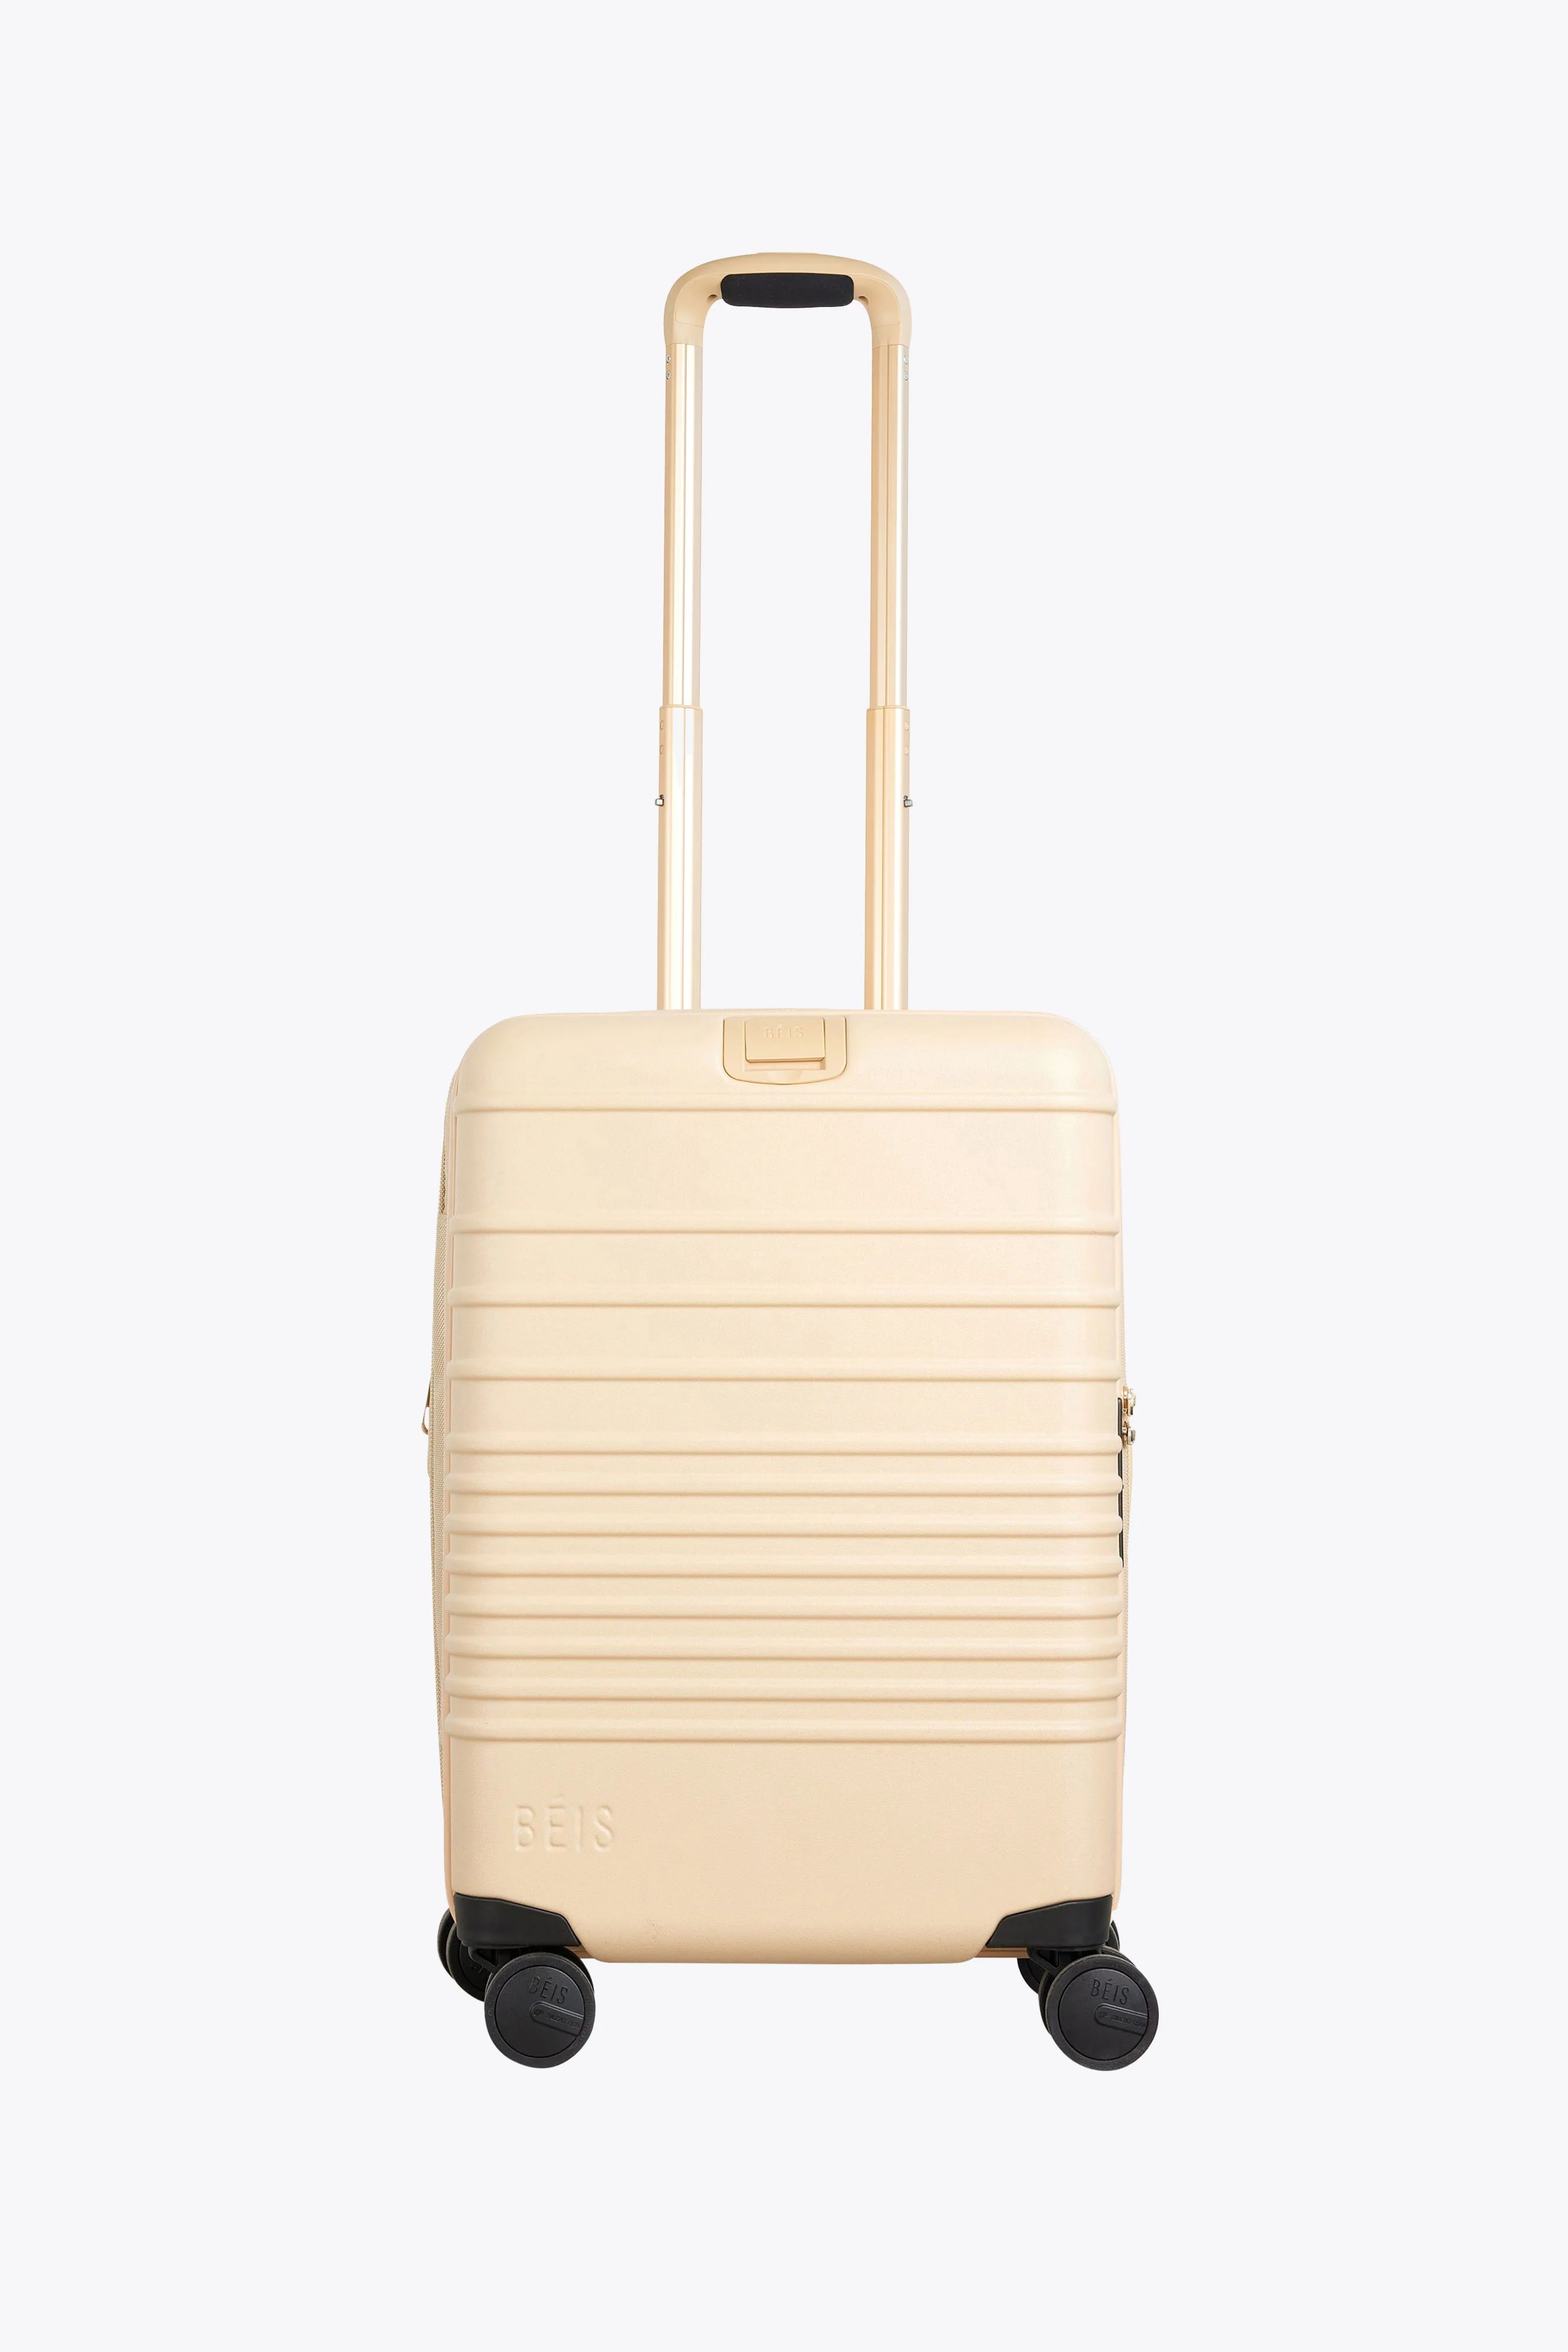 The Carry-On Roller in Beige | BÉIS Travel